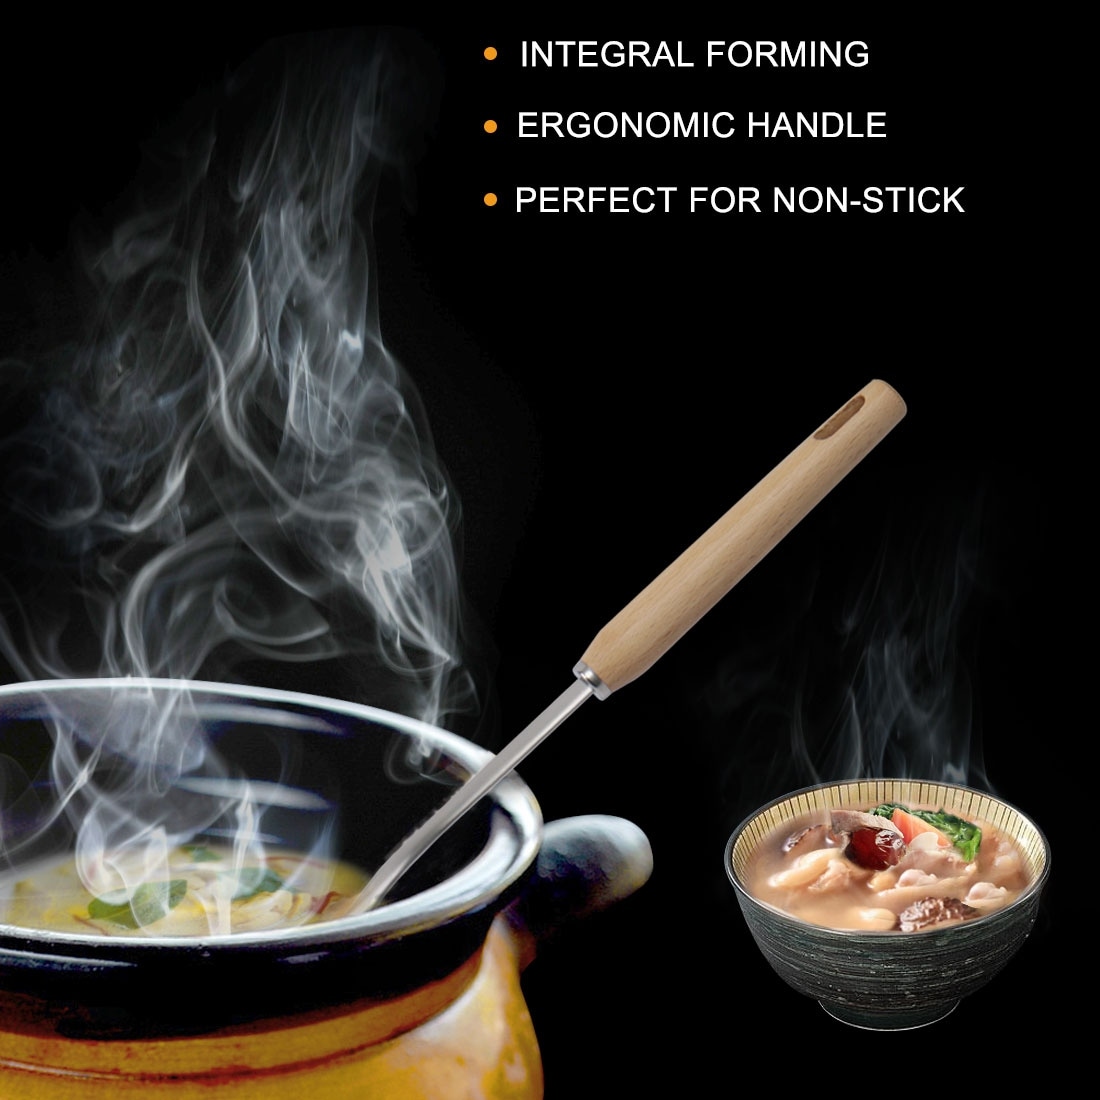 https://ak1.ostkcdn.com/images/products/is/images/direct/1d71d50f2686caa2303b2e2bafa878cf458ee474/Stainless-Steel-Soup-Ladle-Spoon-Wooden-Handle-Cookware-Utensil.jpg